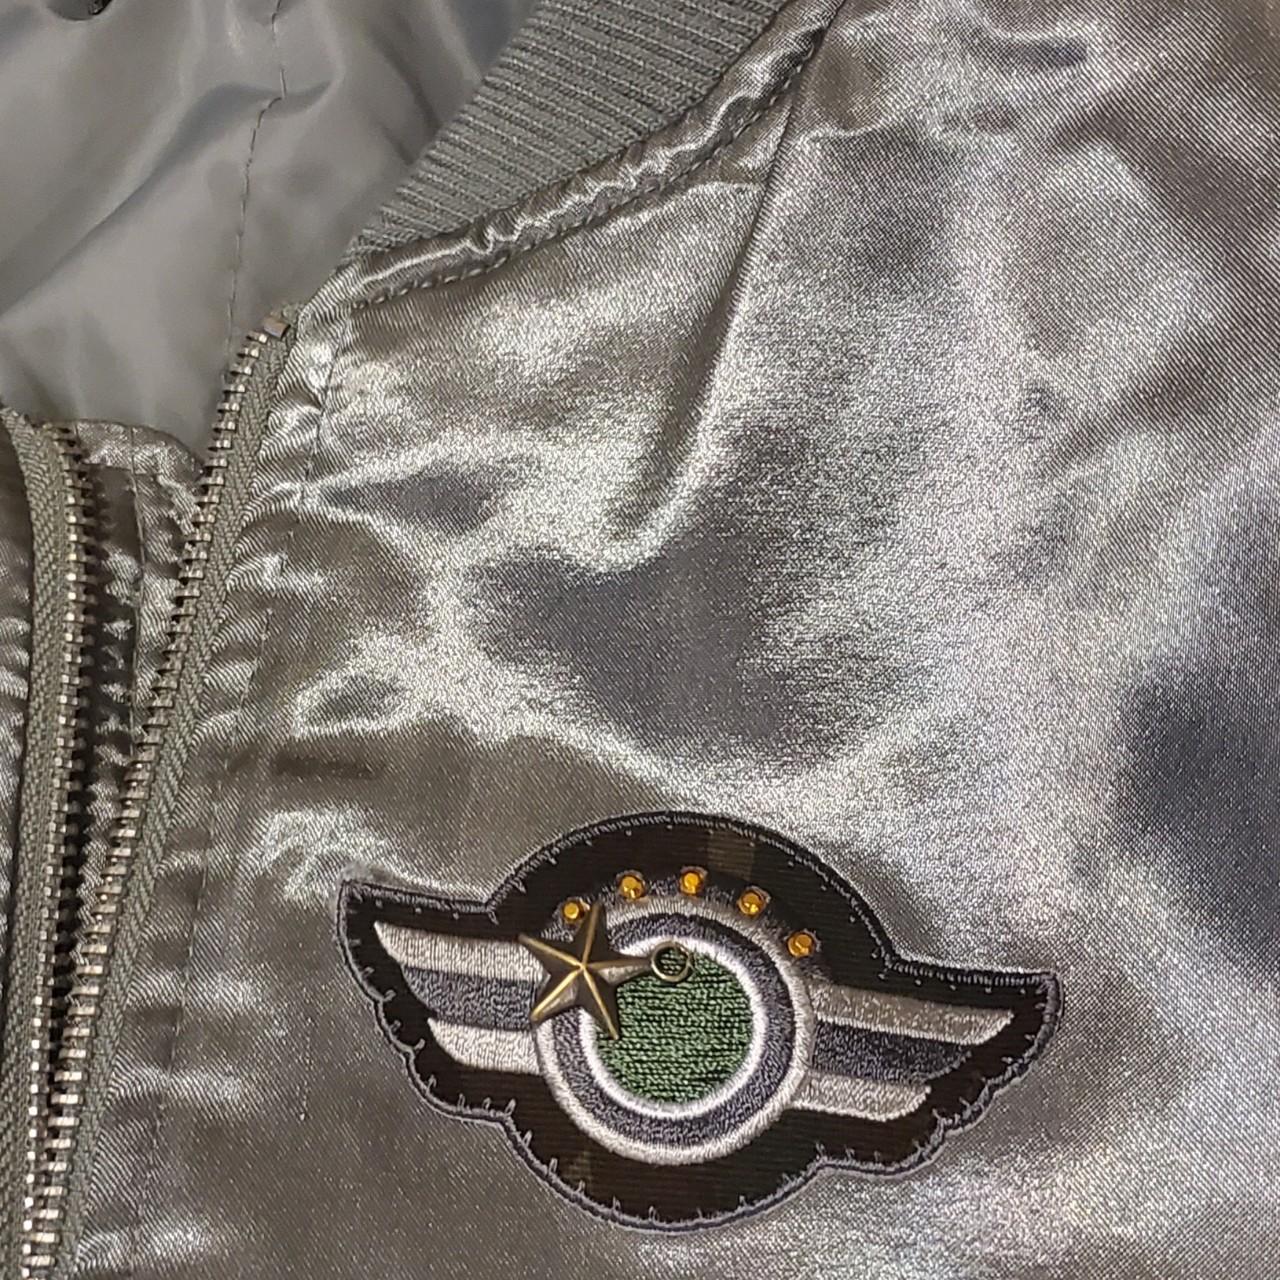 Awesome silver satin jacket with nylon lining - Depop